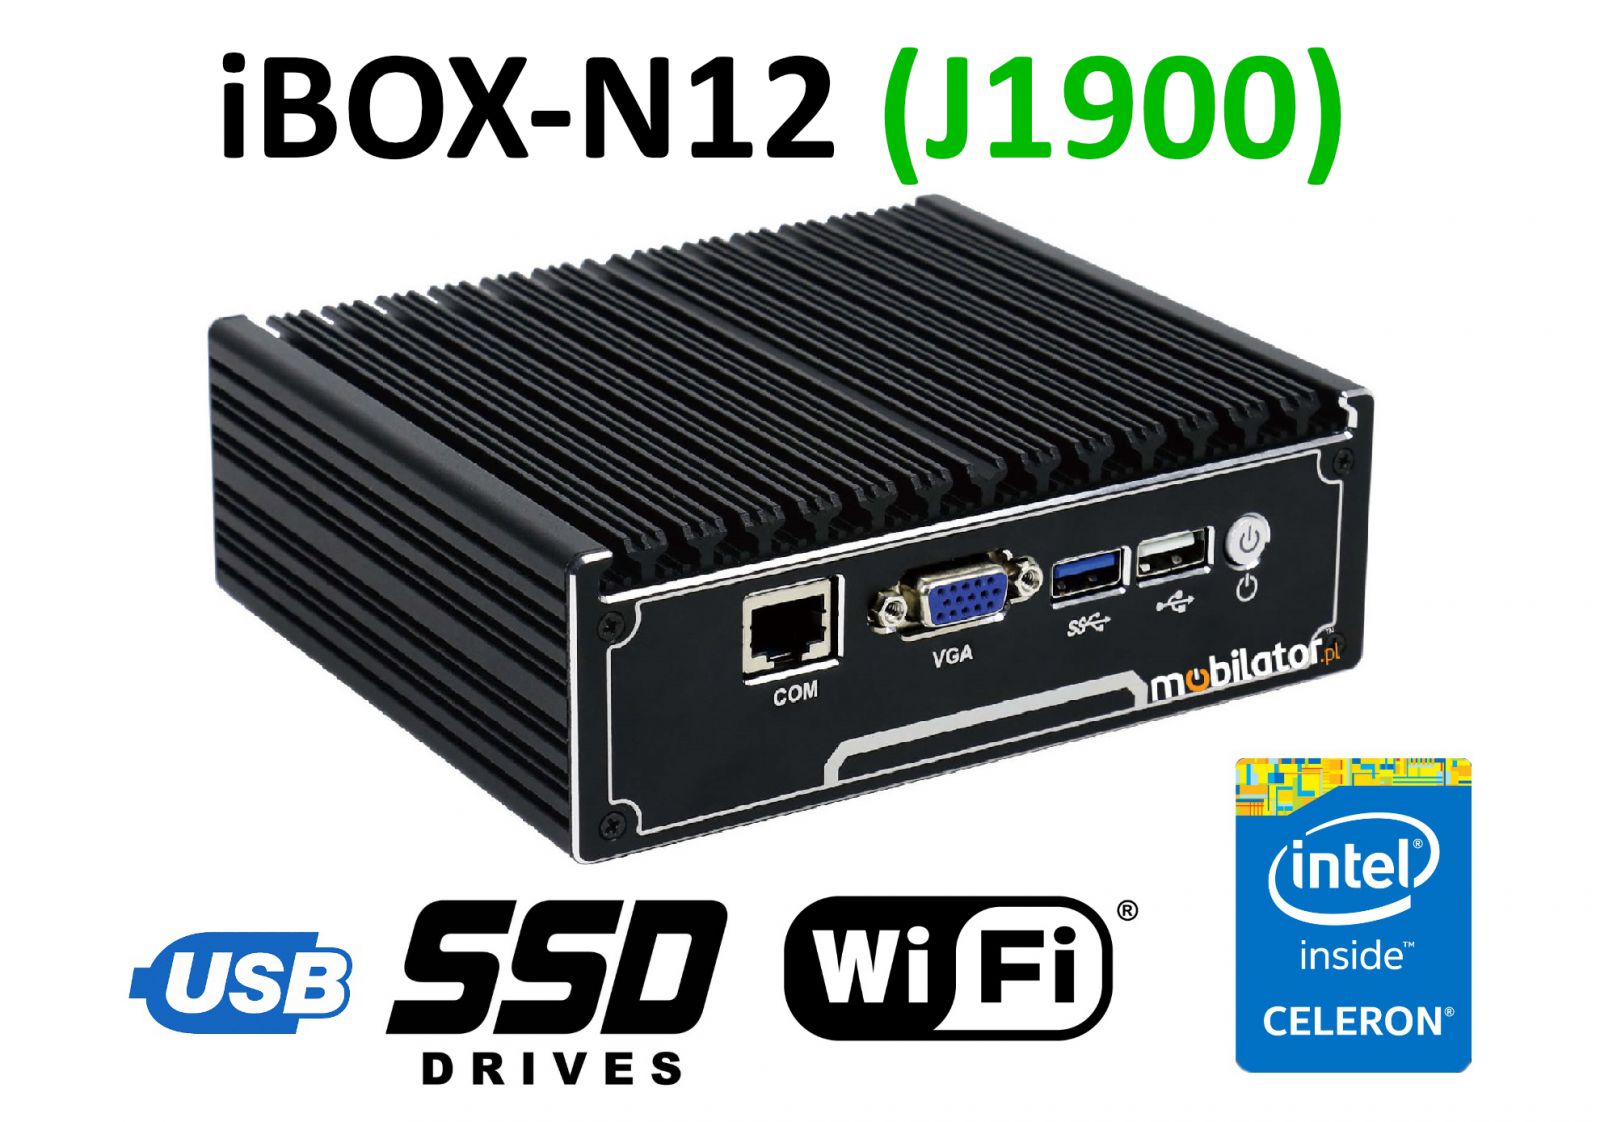 IBOX-N12 (J1900) - Robust industrial mini PC without fans (passive cooling)